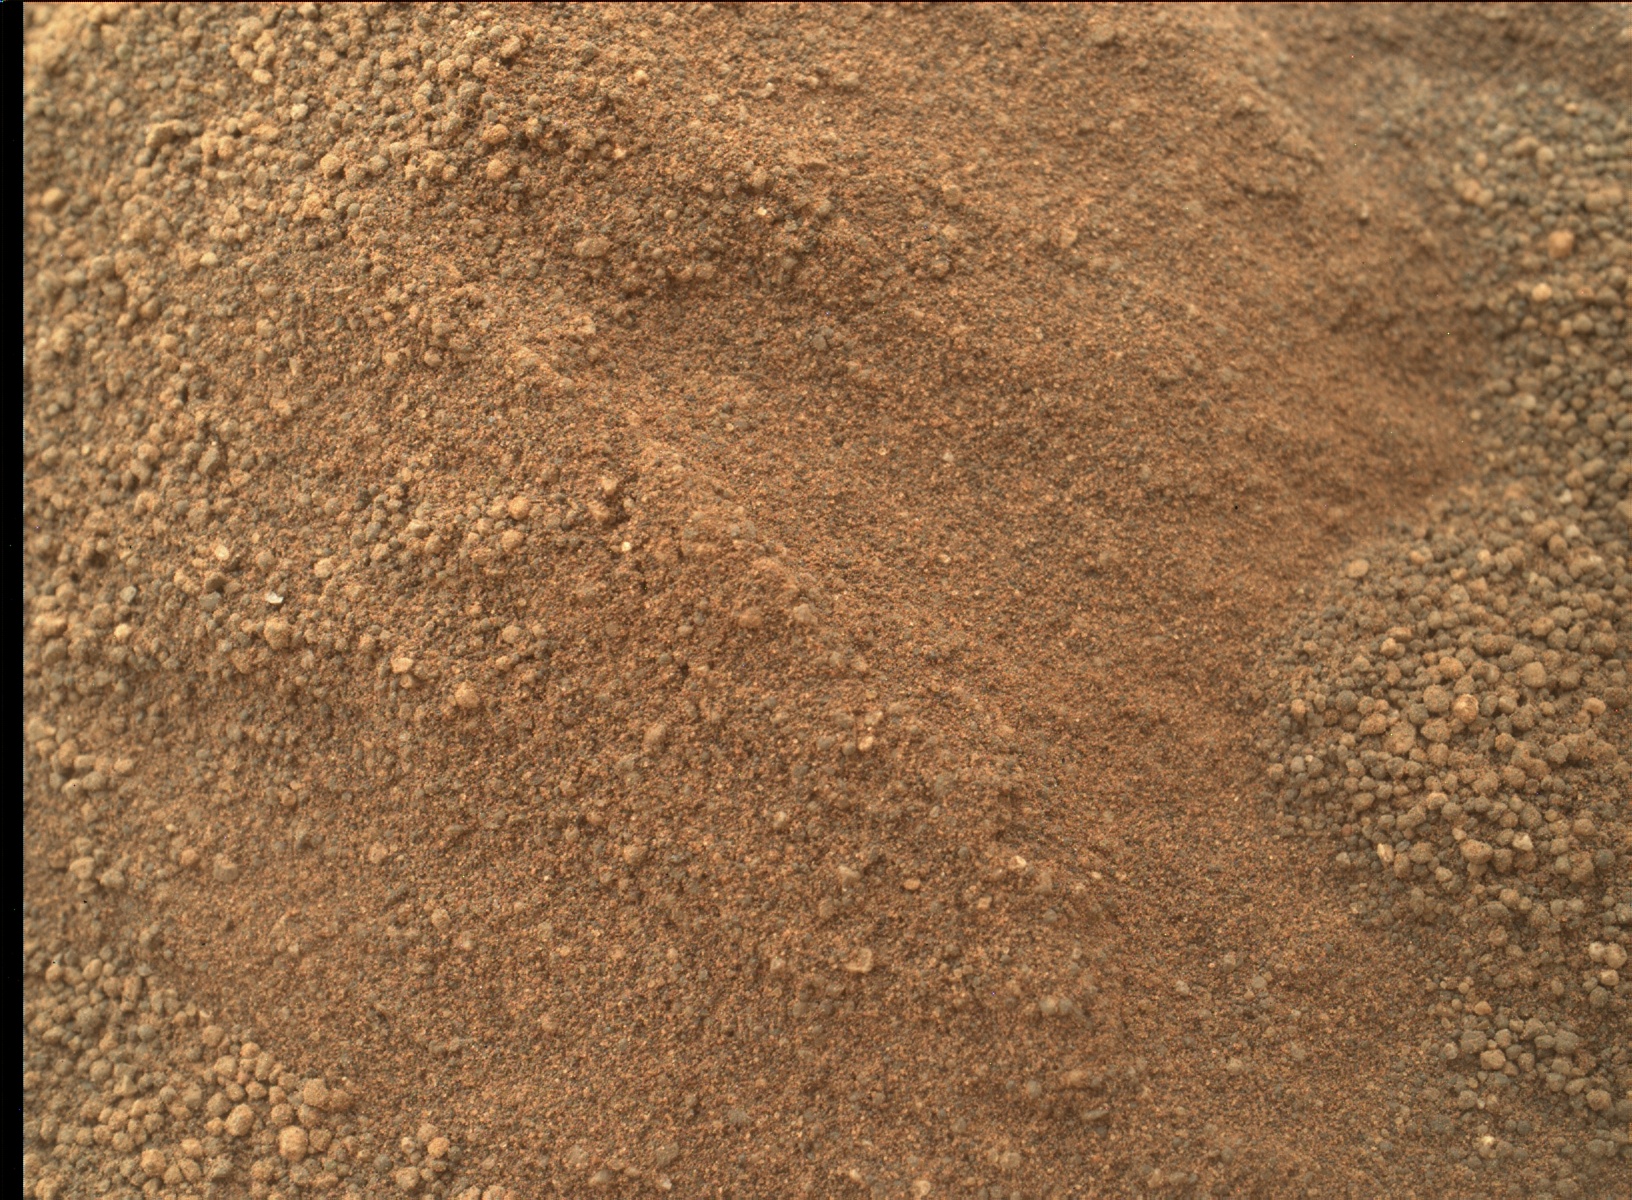 Nasa's Mars rover Curiosity acquired this image using its Mars Hand Lens Imager (MAHLI) on Sol 802